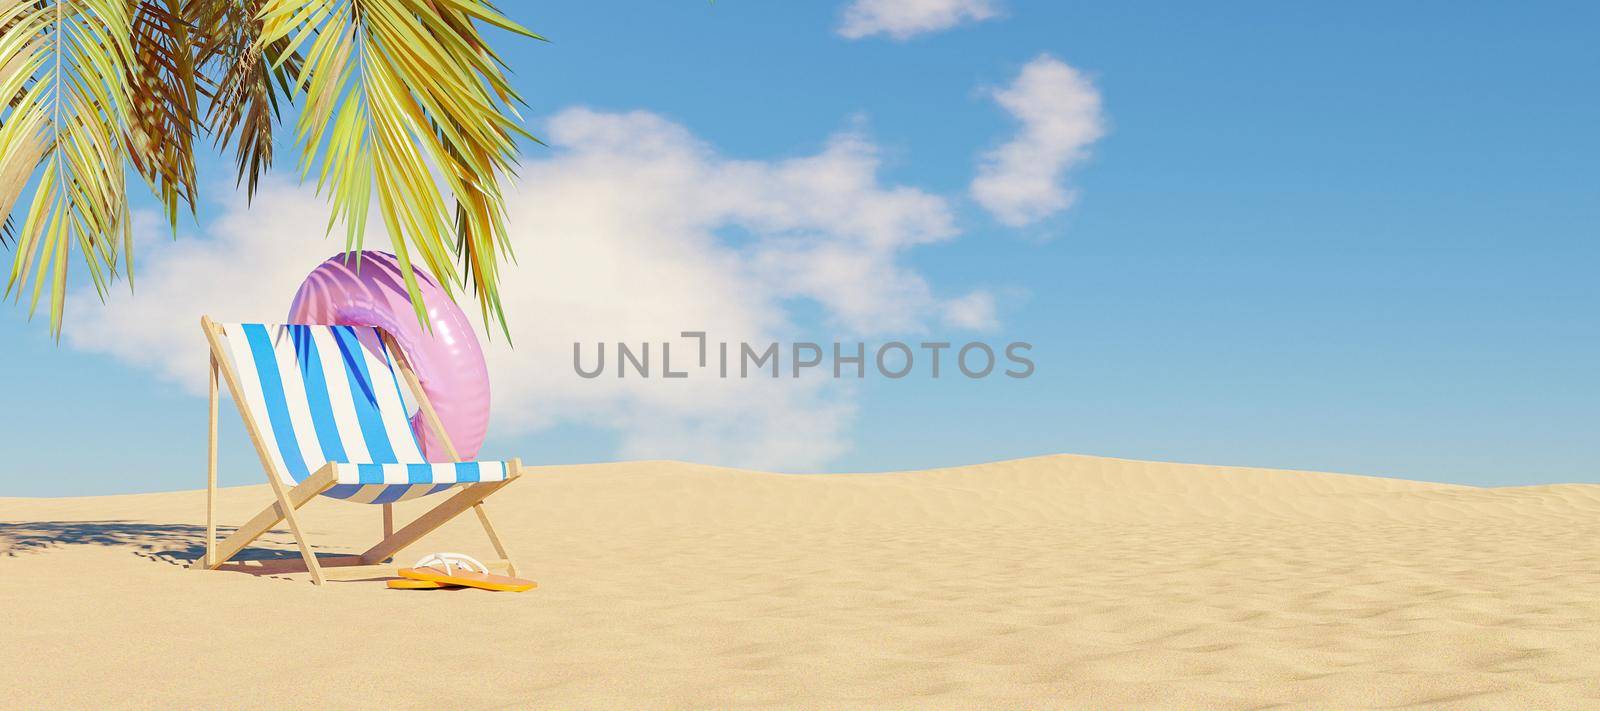 hammock with float and flip flops on beach sand with palm tree shade by asolano